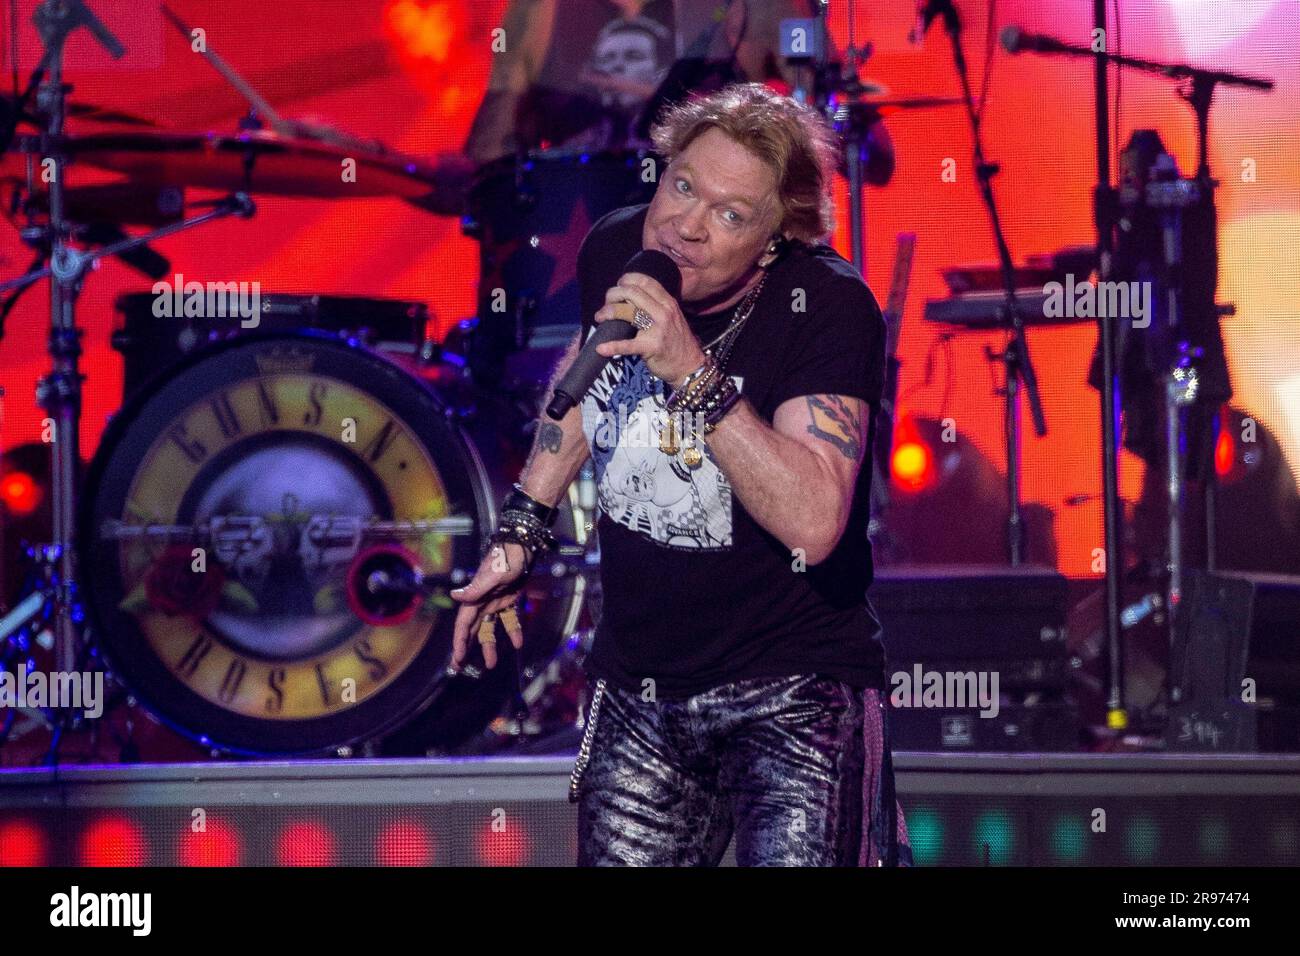 Glastonbury fans all have the same complaint about Axl Rose as Guns N' Roses  perform at festival for the first time